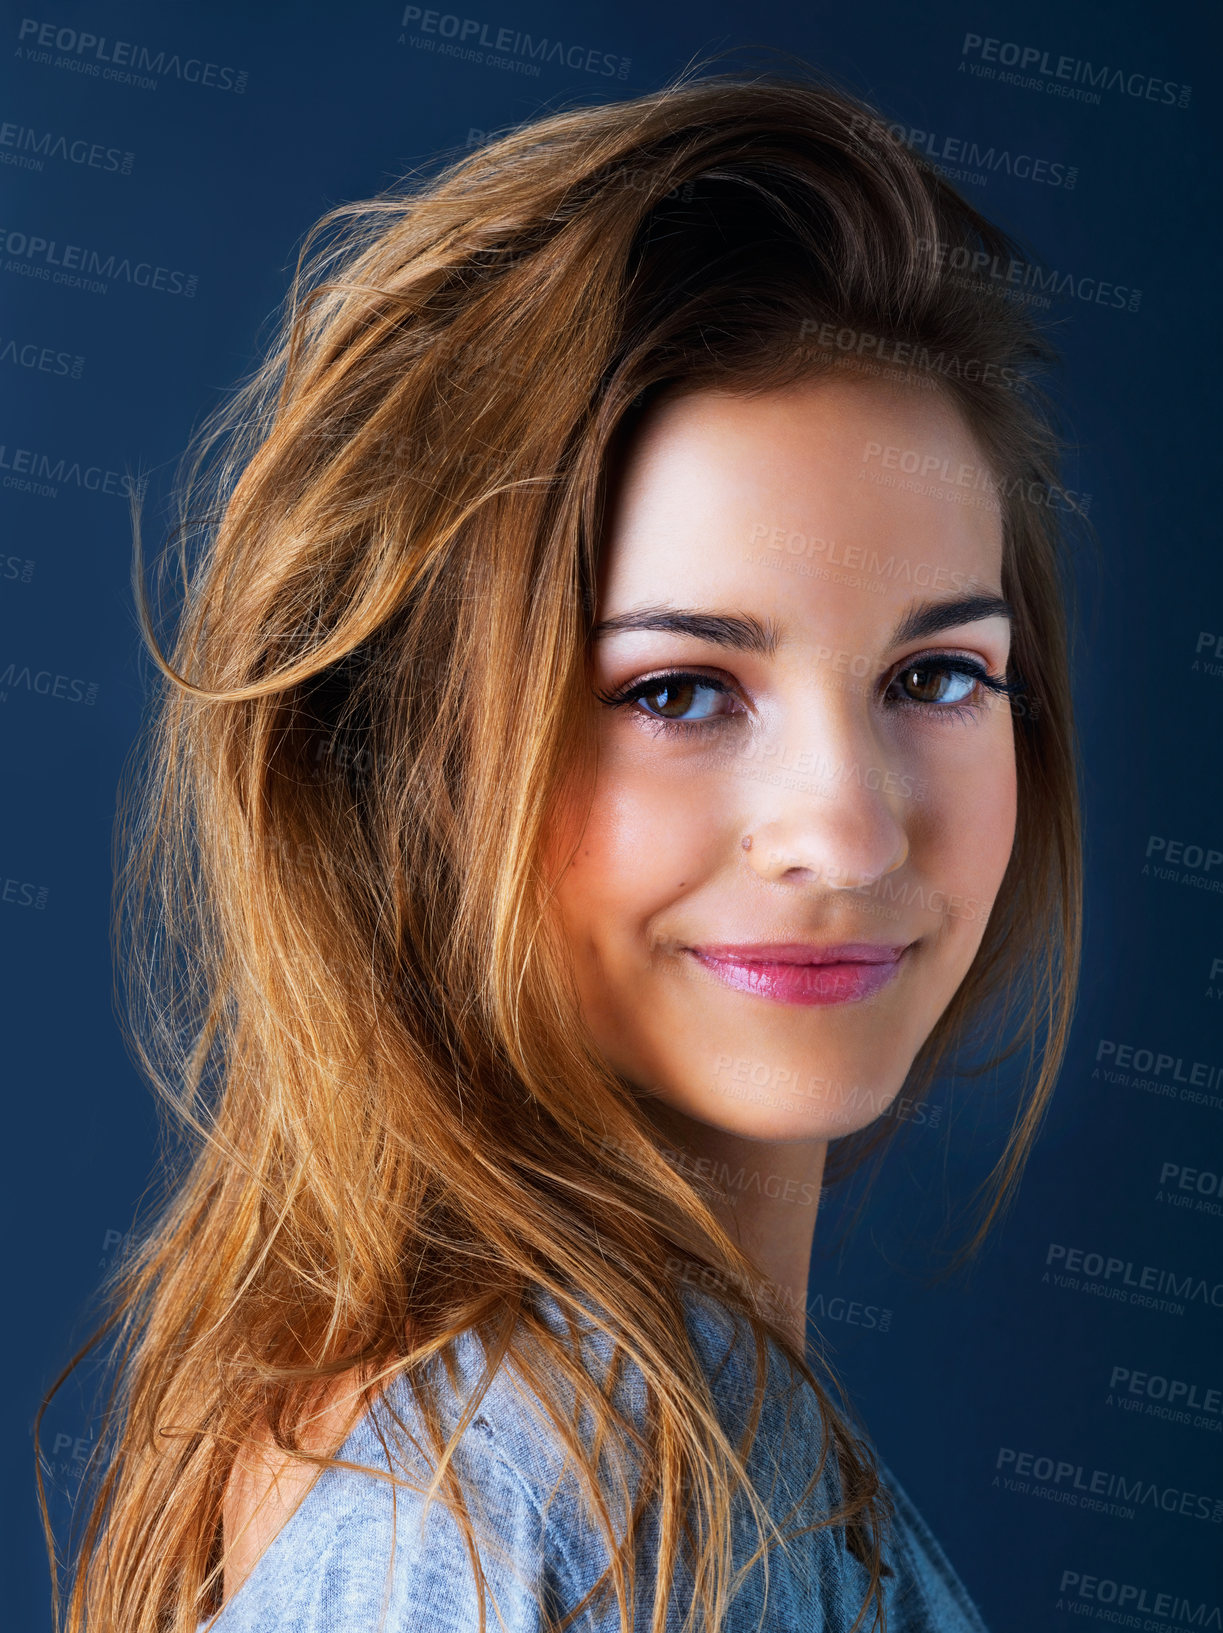 Buy stock photo Studio portrait of a cute teenage girl smiling and posing against a dark background